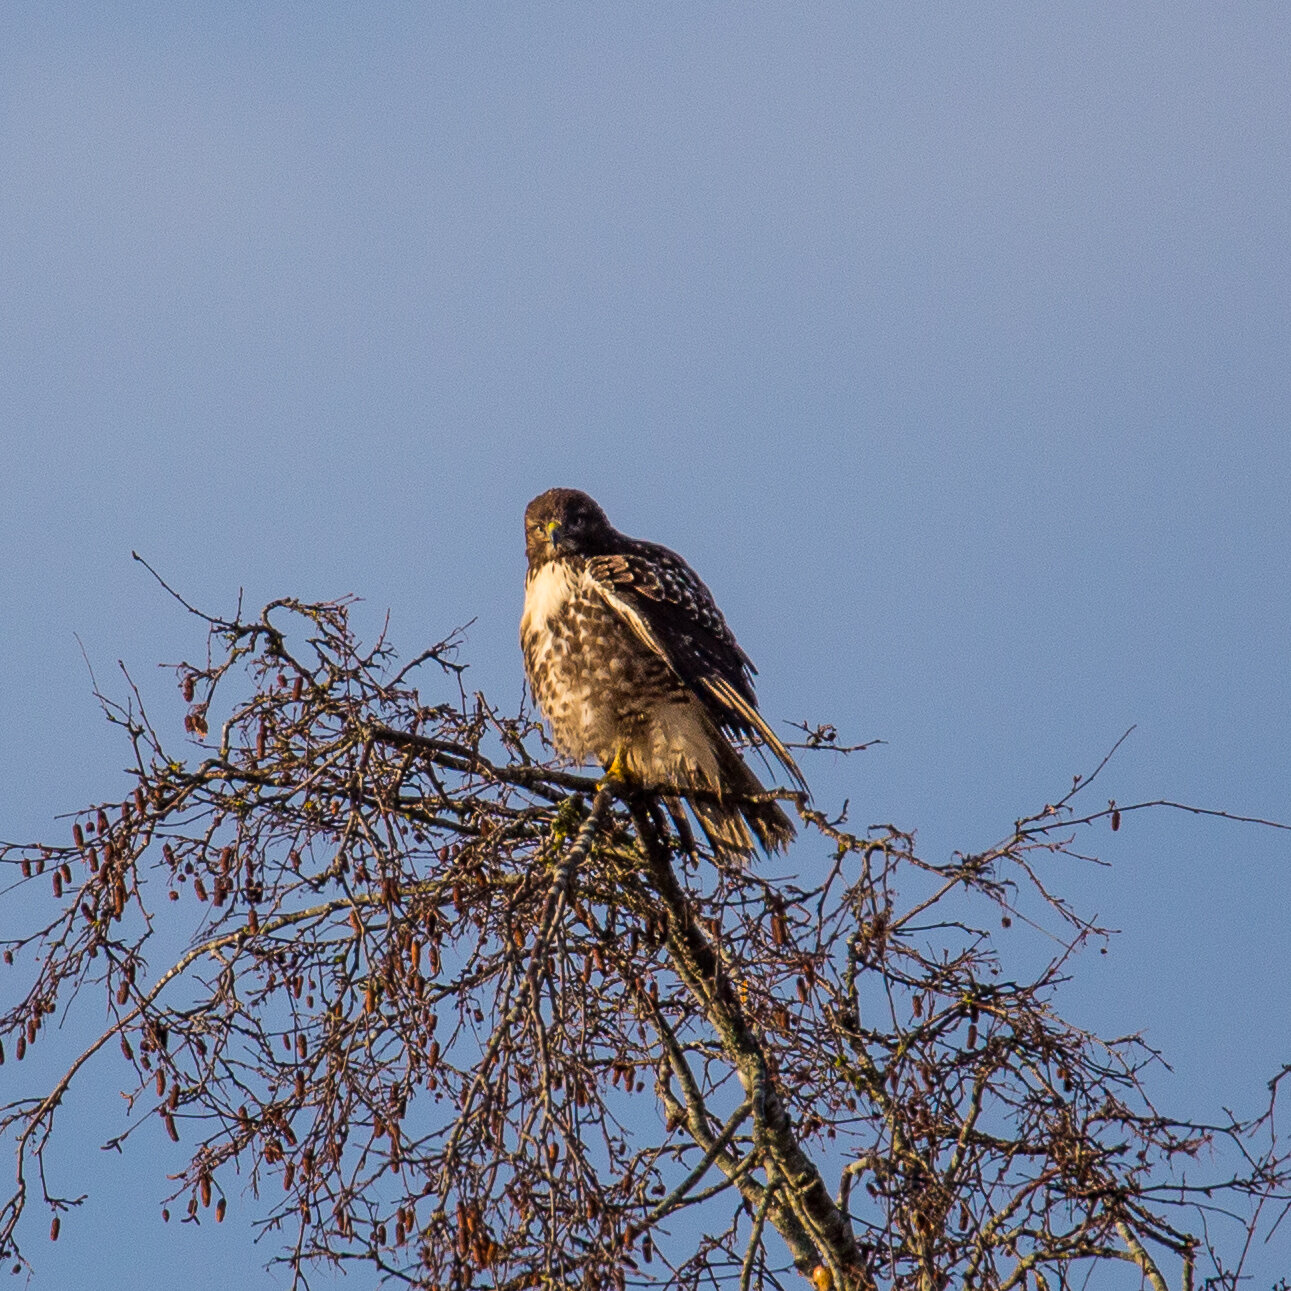  I’m not sure if this is a juvenile Cooper’s Hawk or a Red-tailed hawk. From different angles, I get different opinions. 